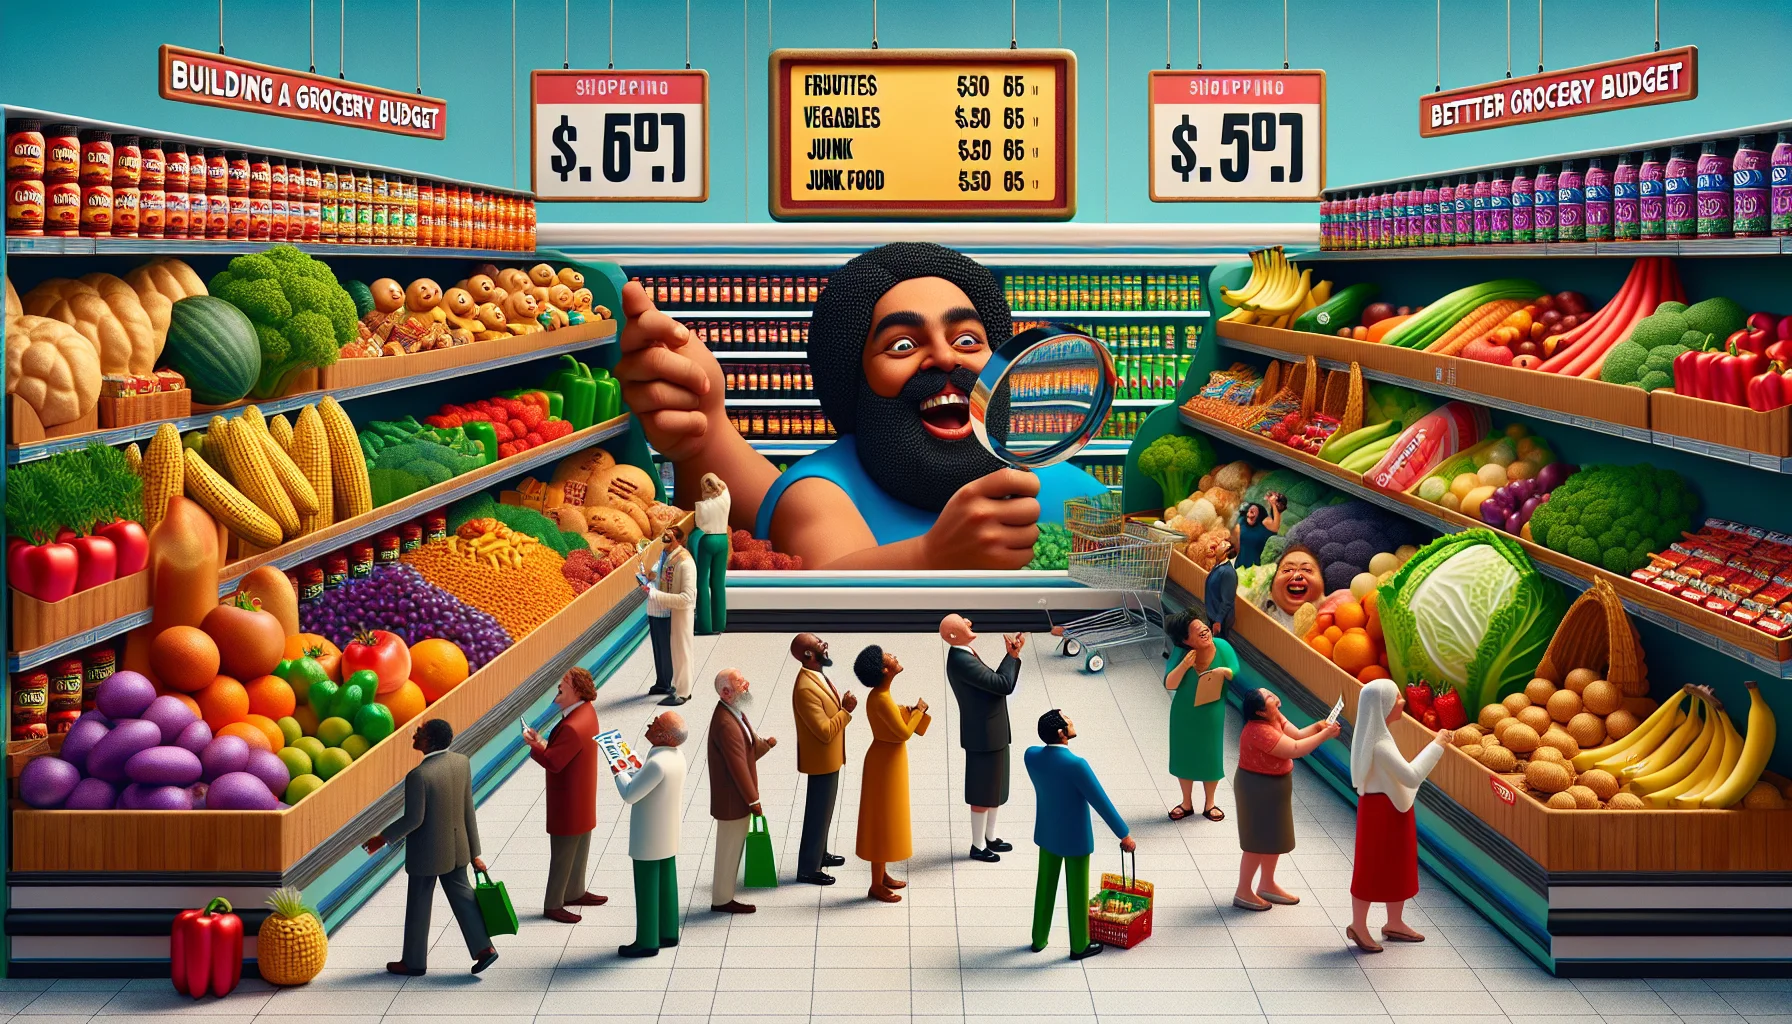 Create a humorous and realistic scene depicting the concept of 'Building a Better Grocery Budget'. The scene should contain an elaborate grocery store aisle occupied by individuals of different genders and descents, African, Hispanic, Caucasian, Middle-Eastern and South Asian. Some are comparing prices of fruits and vegetables versus junk food, while others are laughing at giant price tags on tiny unhealthy snacks. Also incorporate an image of a woman, possibly Caucasian, with a magnifying glass inspecting giant healthy vegetable with a tiny price tag. Make sure to visualize the surprise and amusement on their faces.